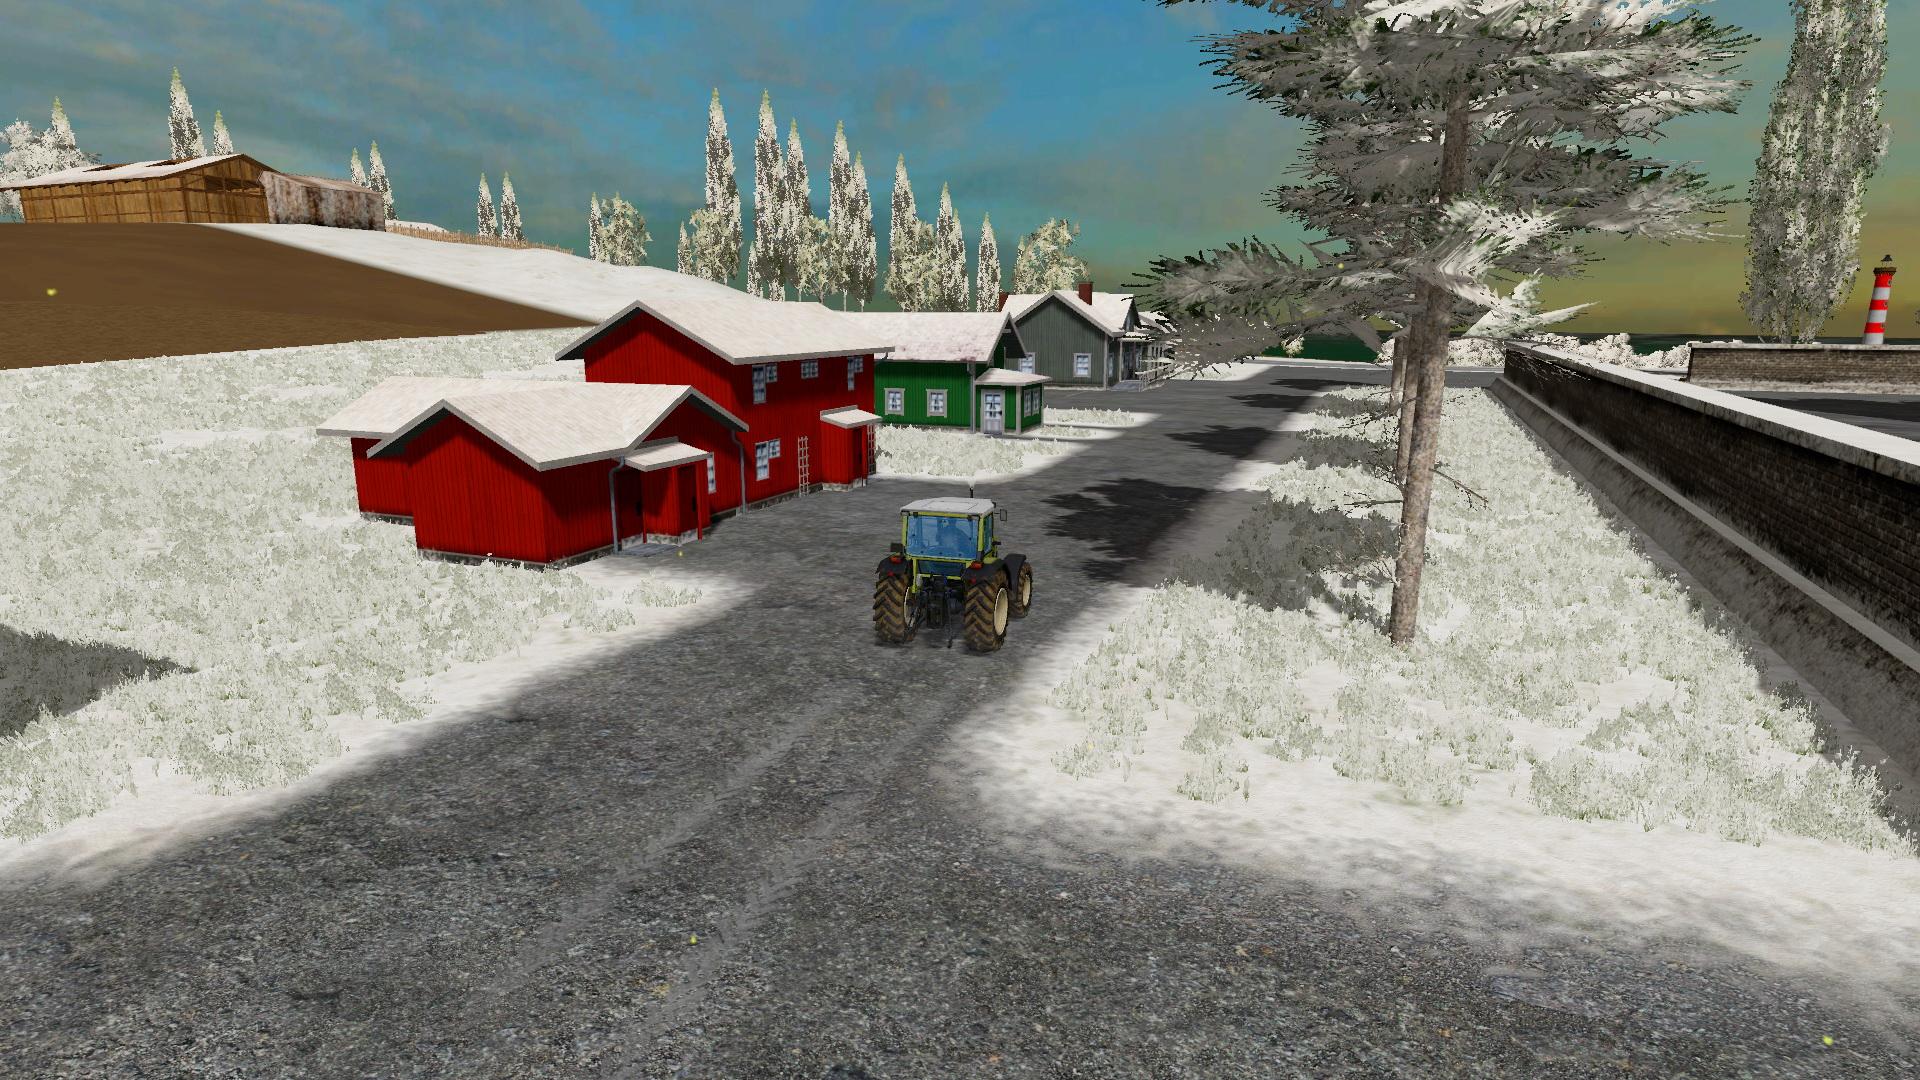 Gallery of Fs19 Instant Snow Mods.